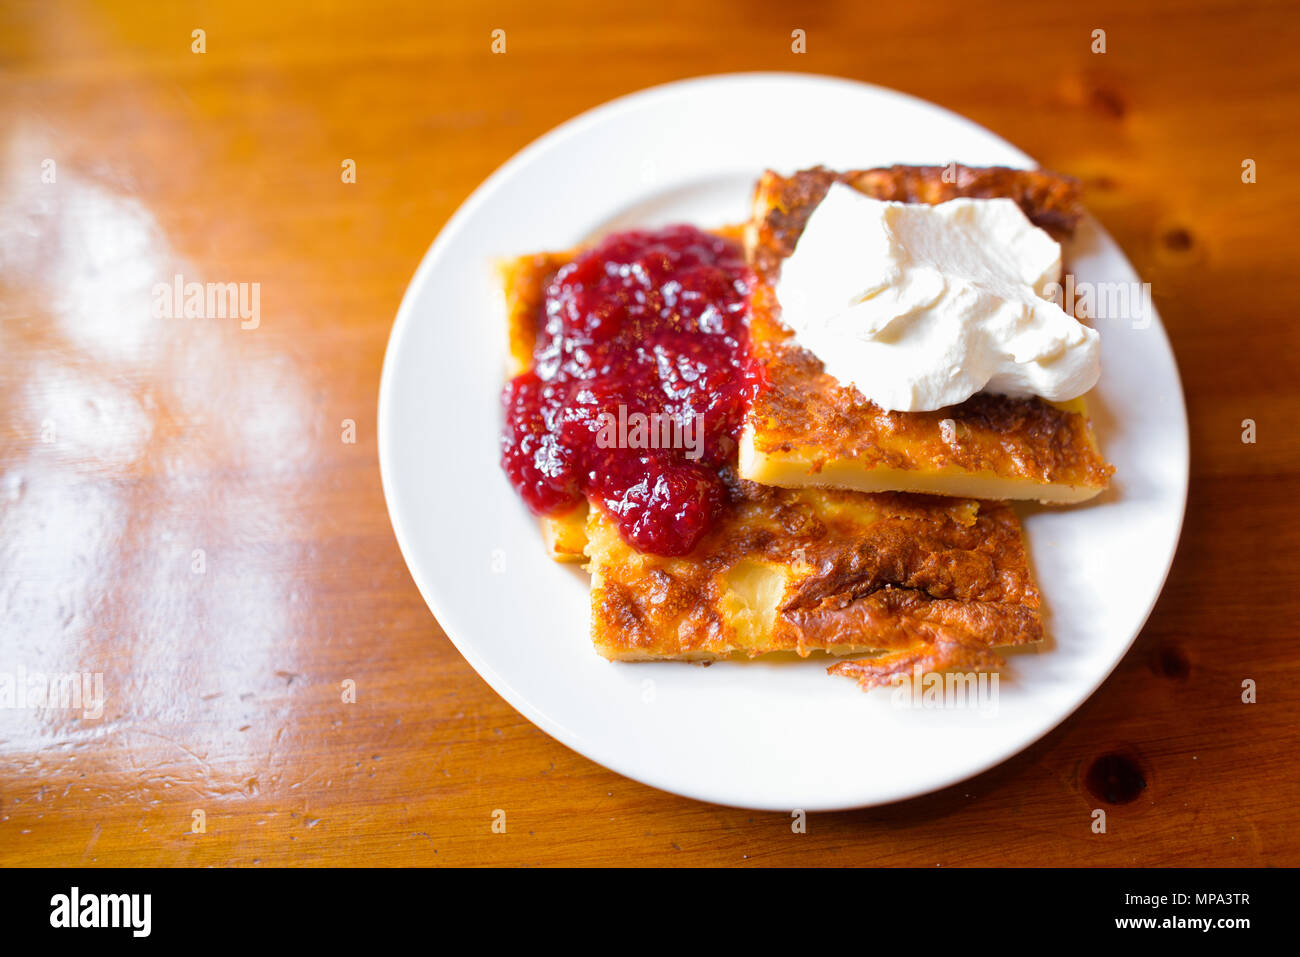 Finnish Pancakes Served On Table Stock Photo